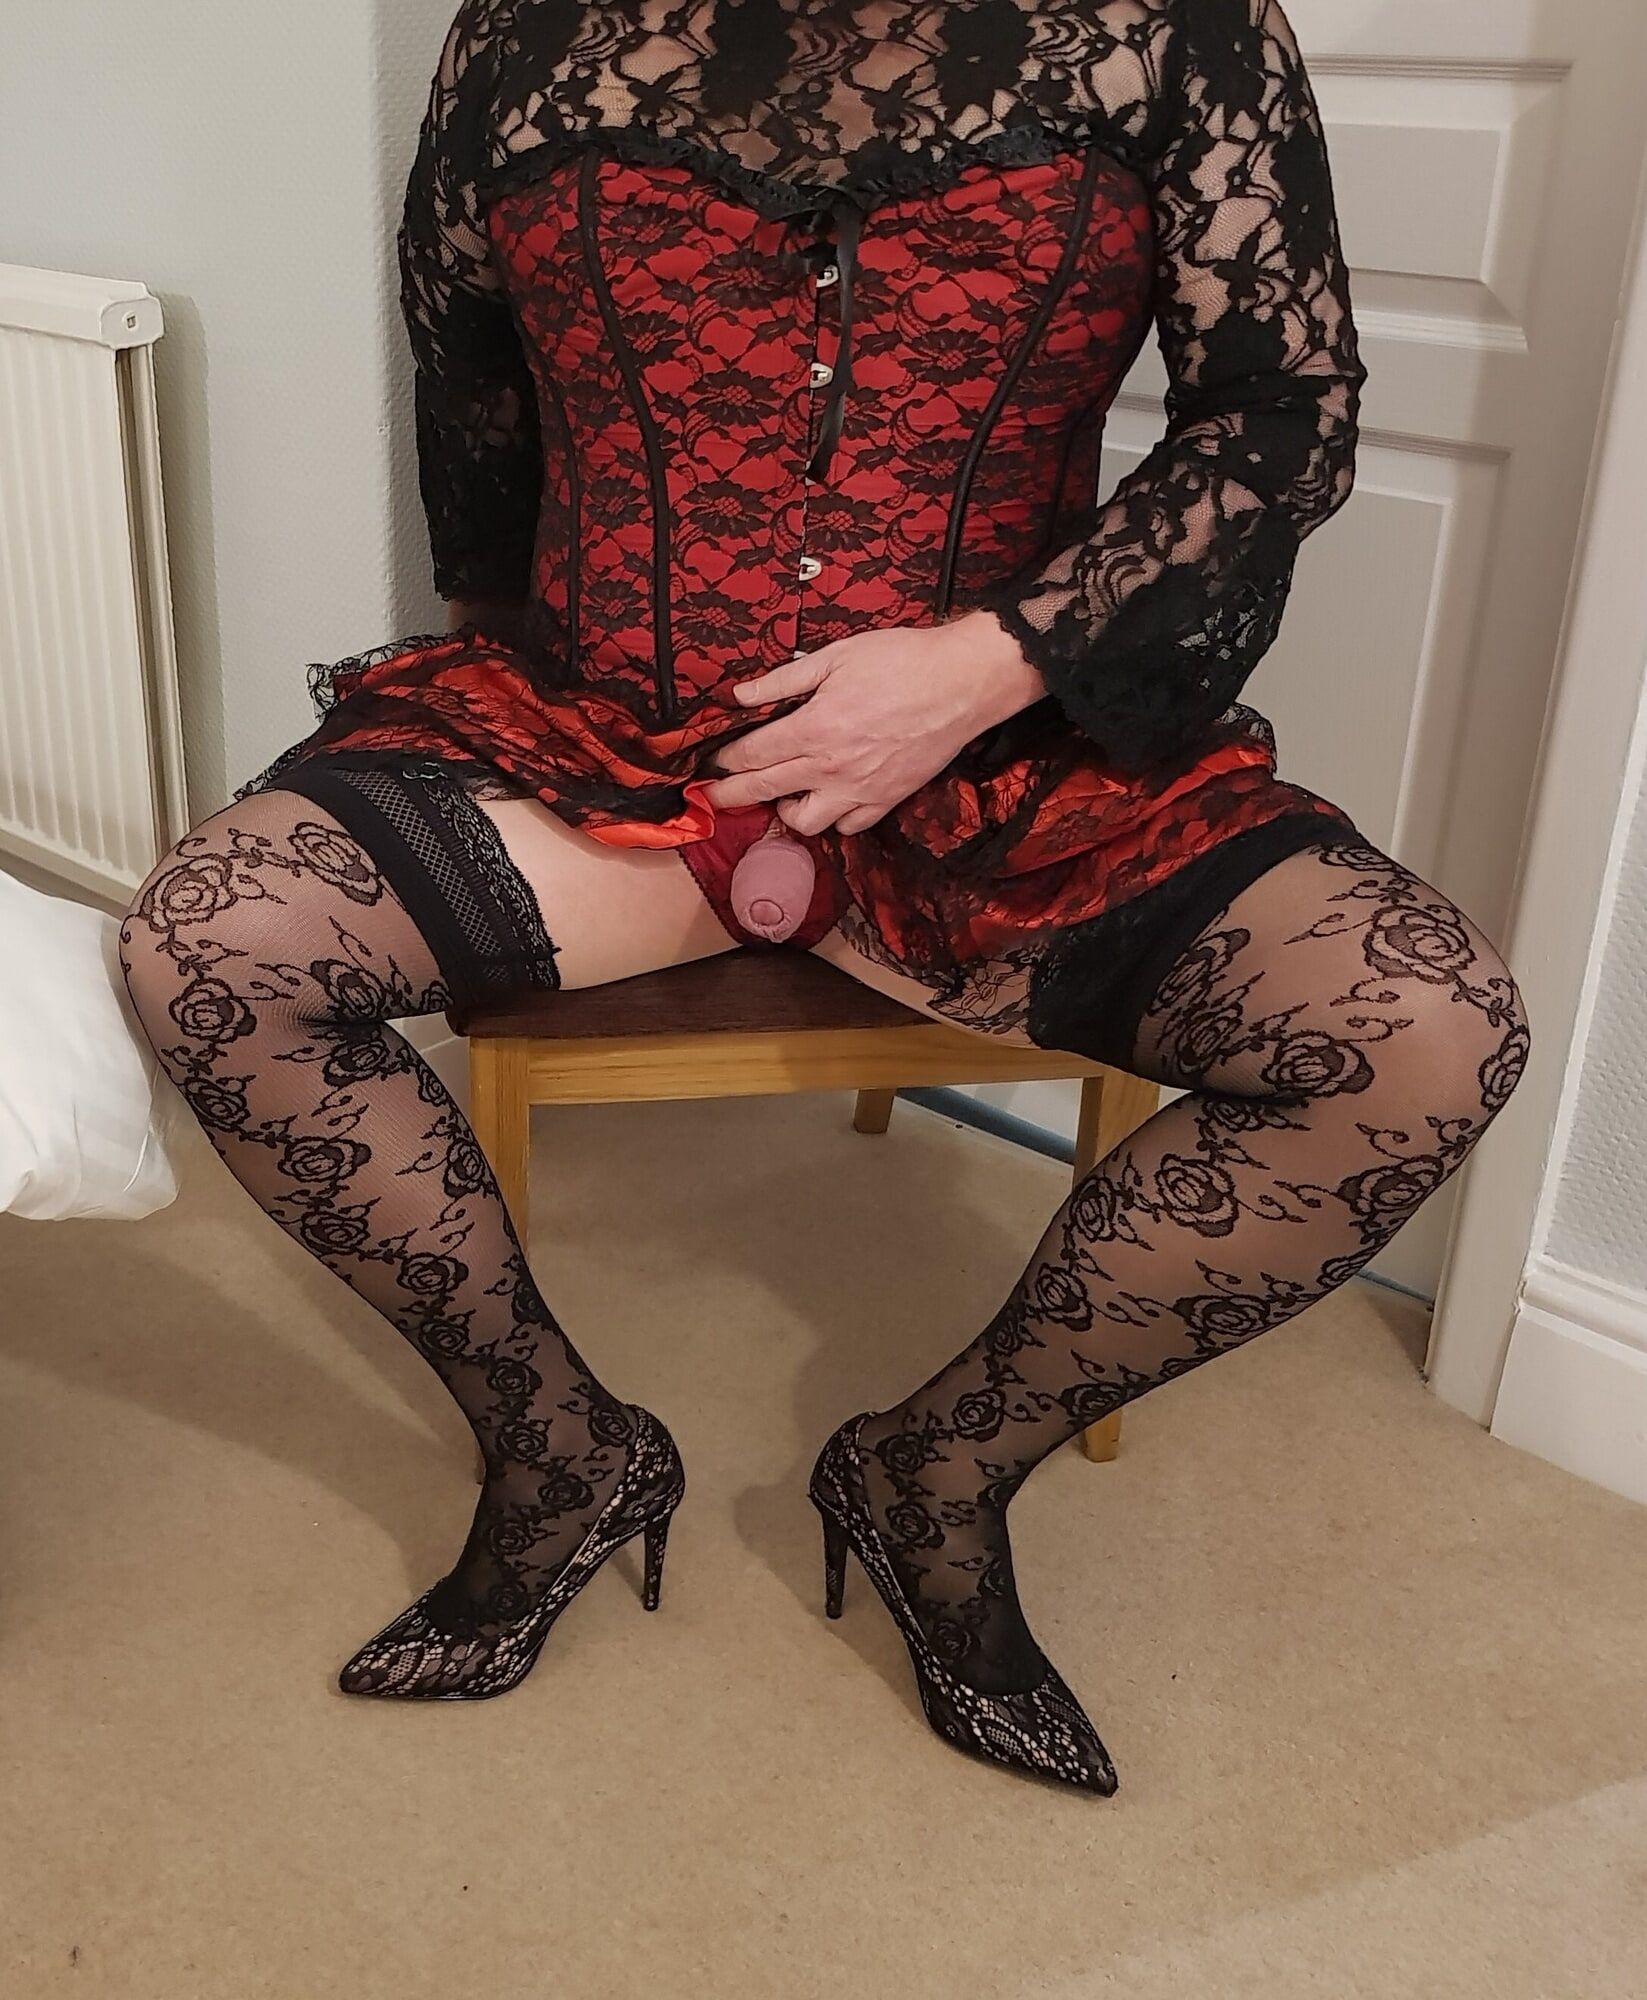 Crossdressing in floral lace lingerie, skirt and heels #8